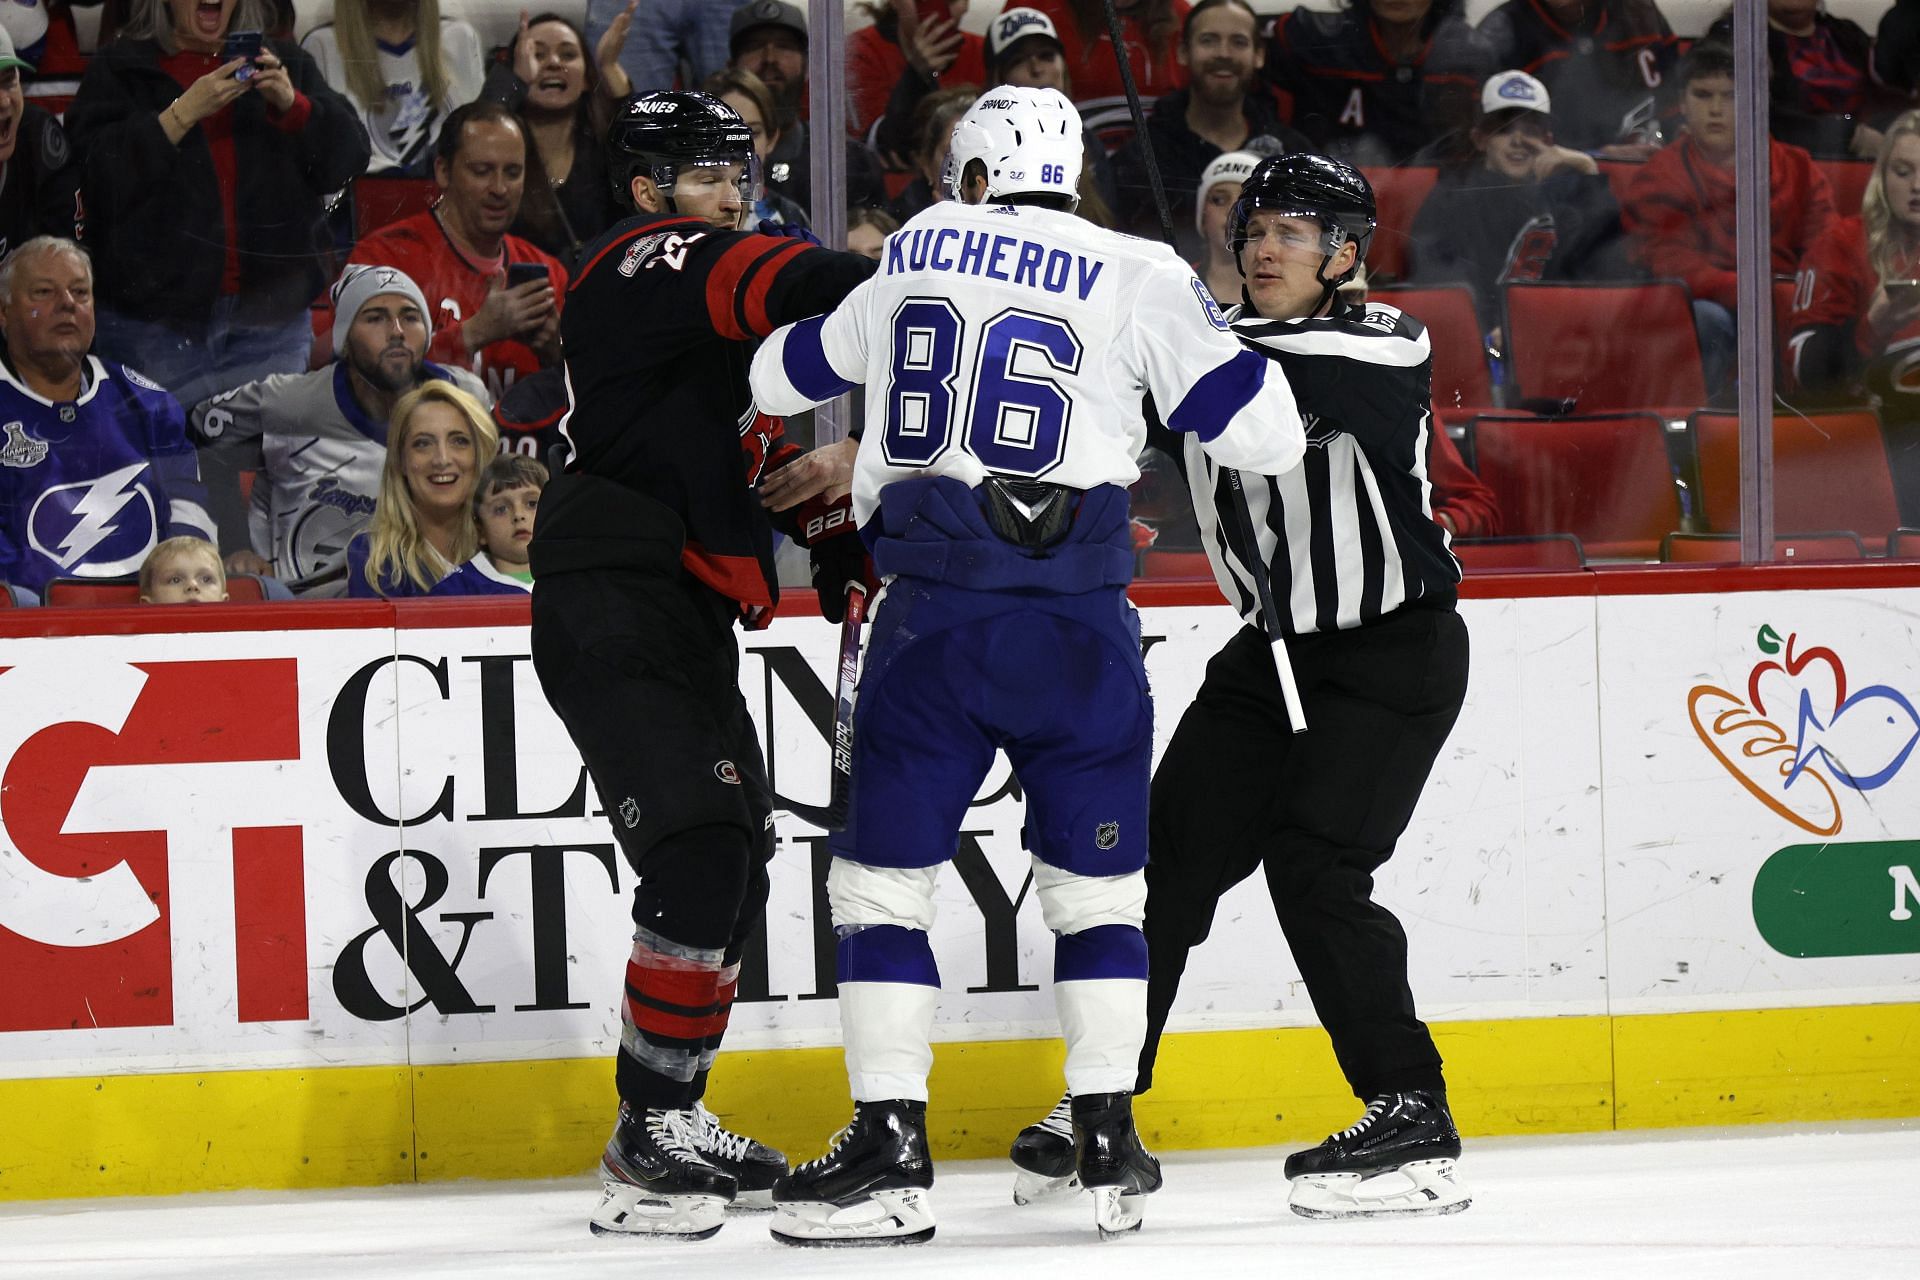 Nikita Kucherov was pictured during an argument with the Canes player.